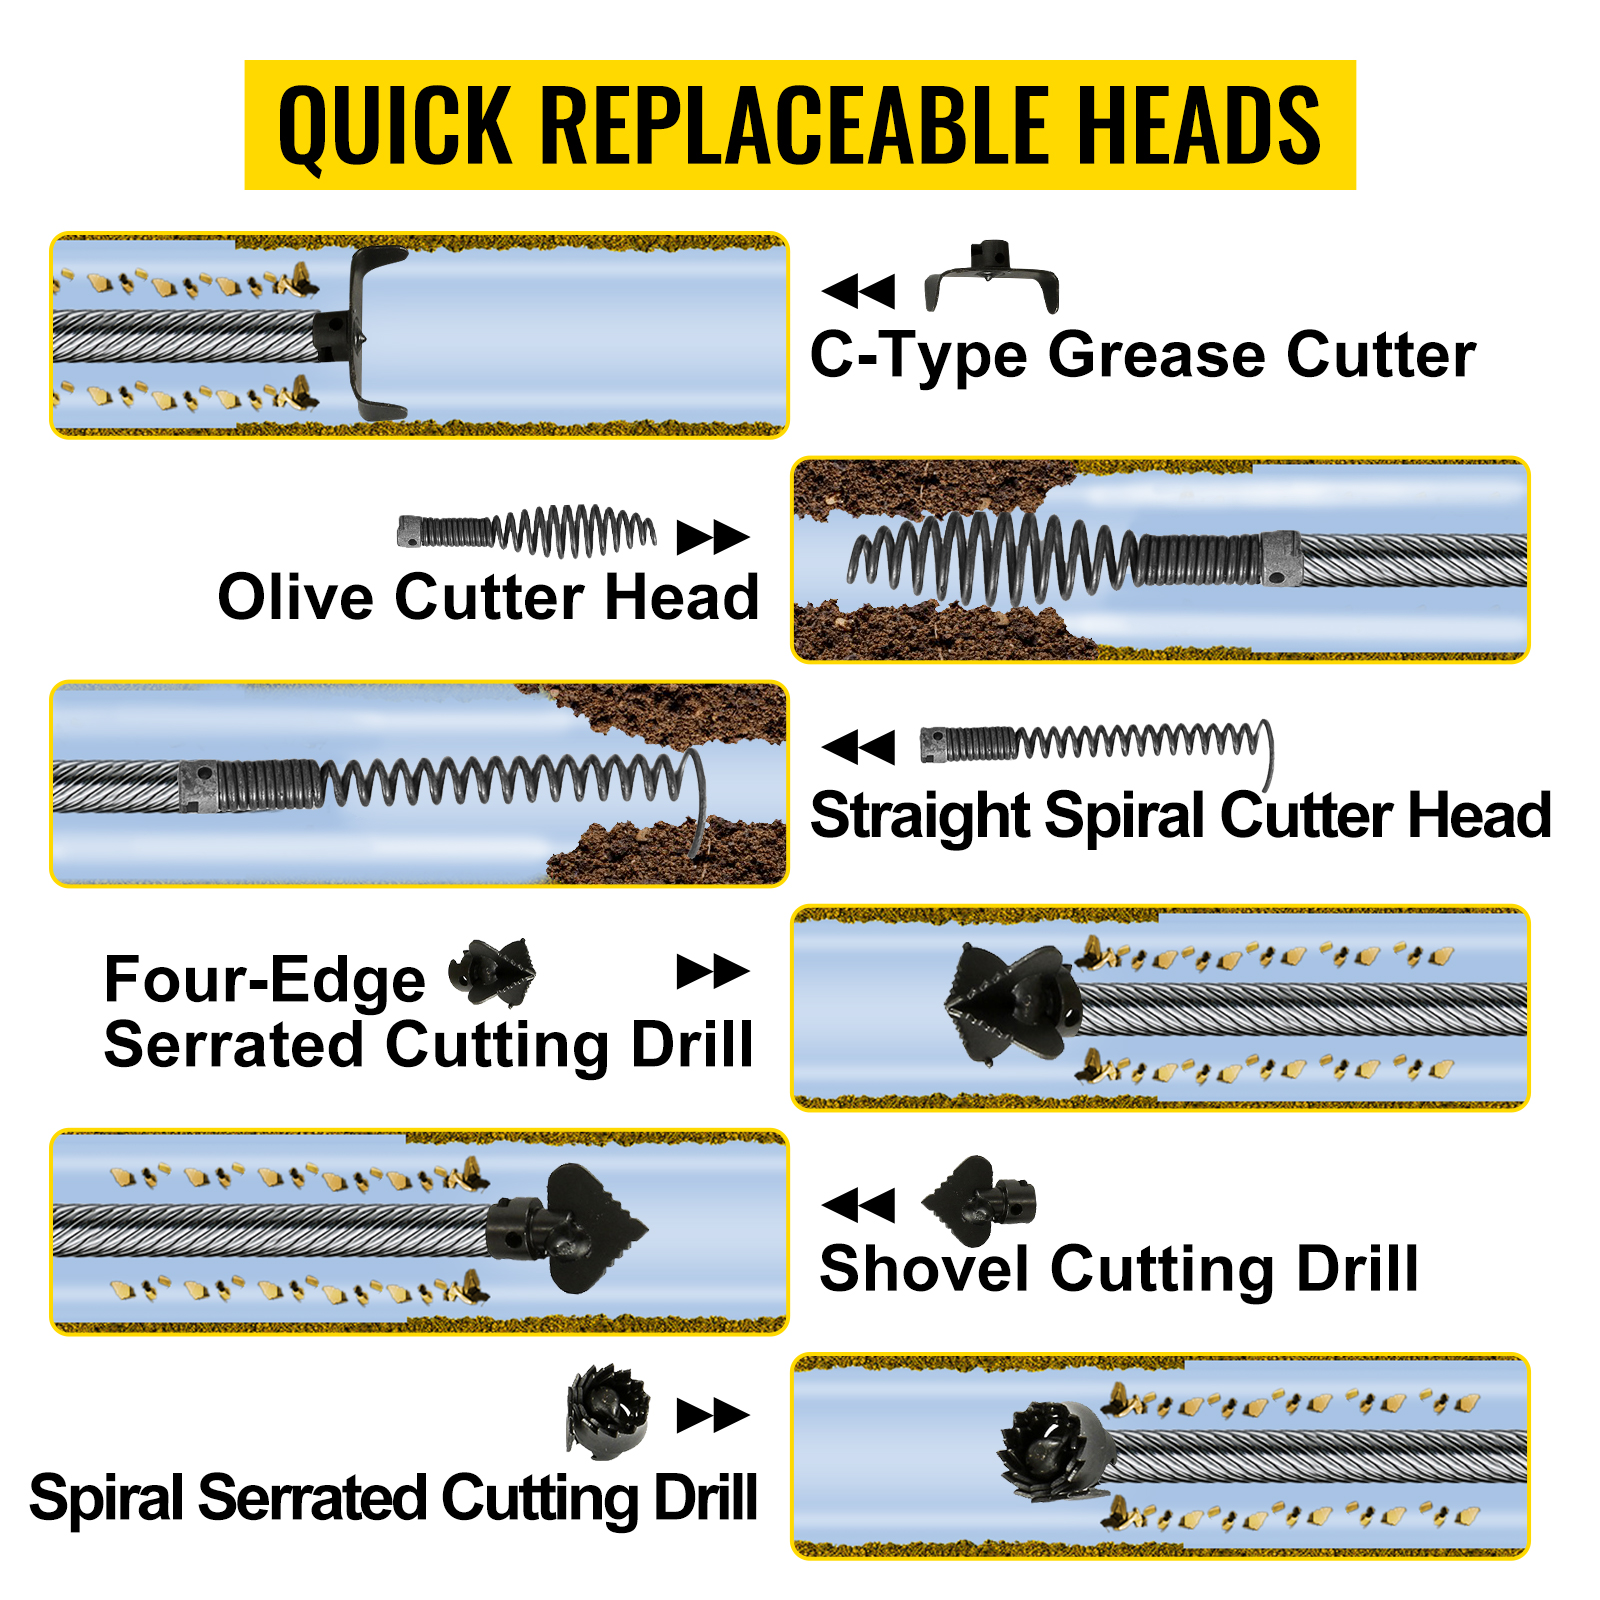 Drain Cleaning Tools Selection Guide